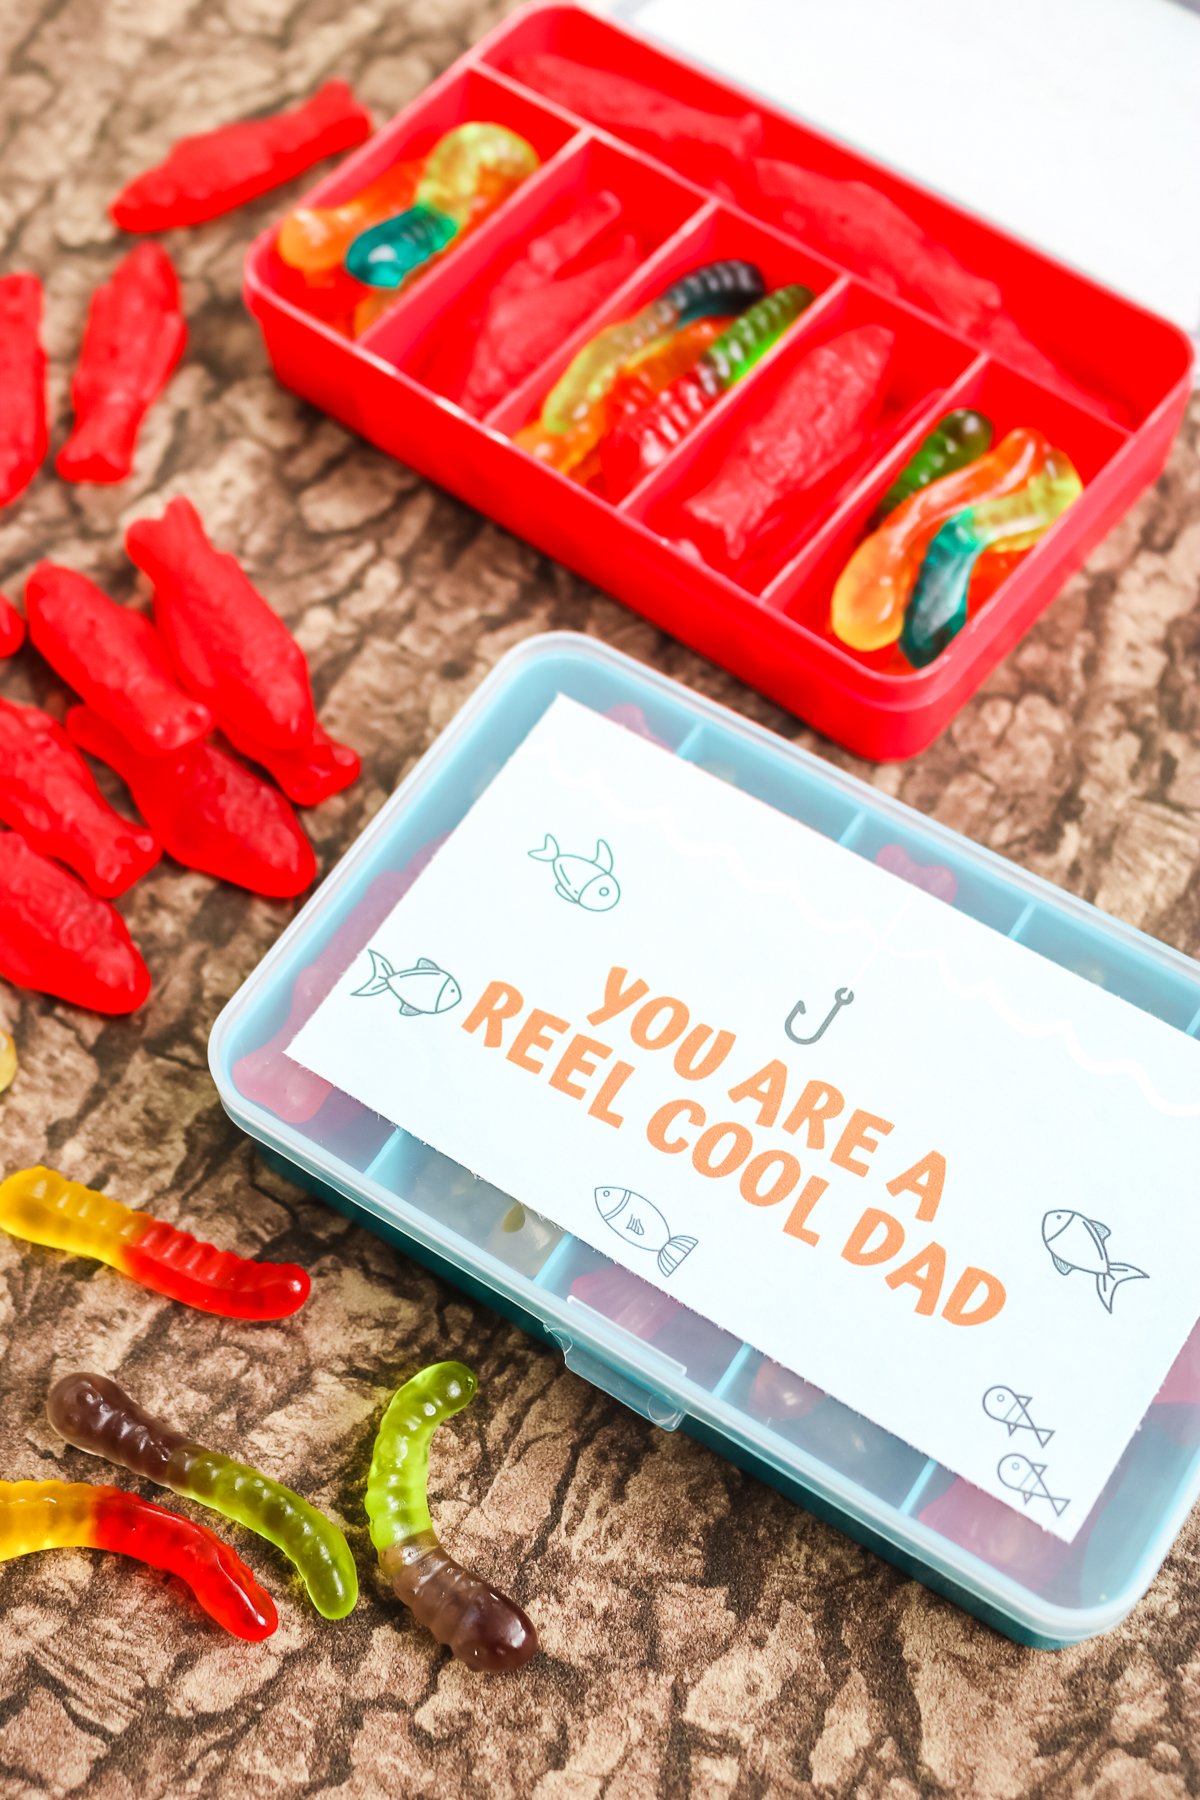 Father's Day Fishermen Gift Guide